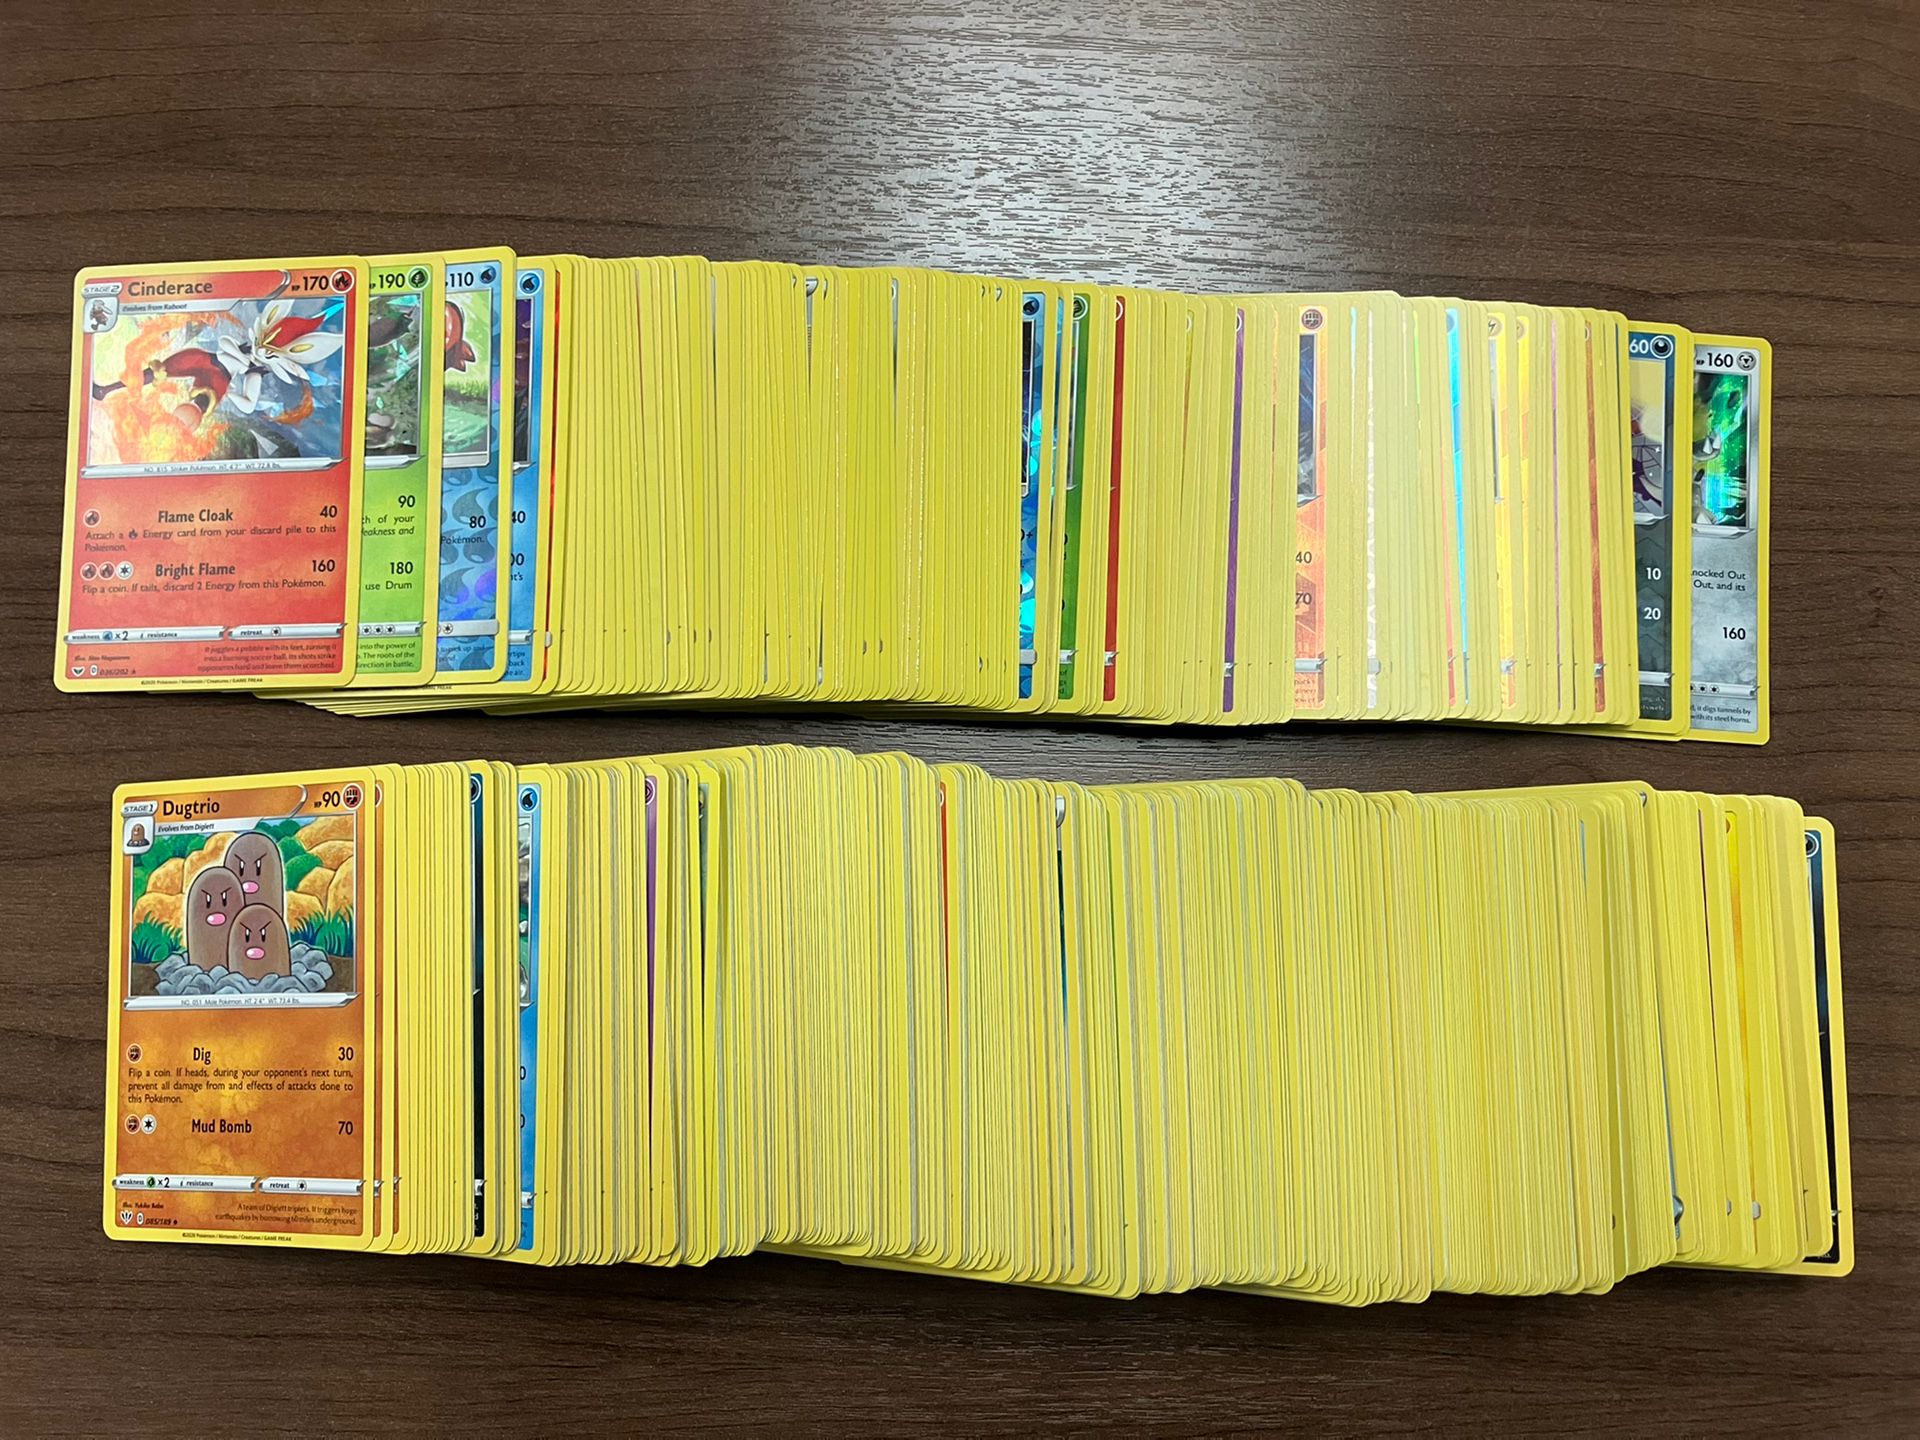 562 Card Collection of POKÉMON  from 2017-2020